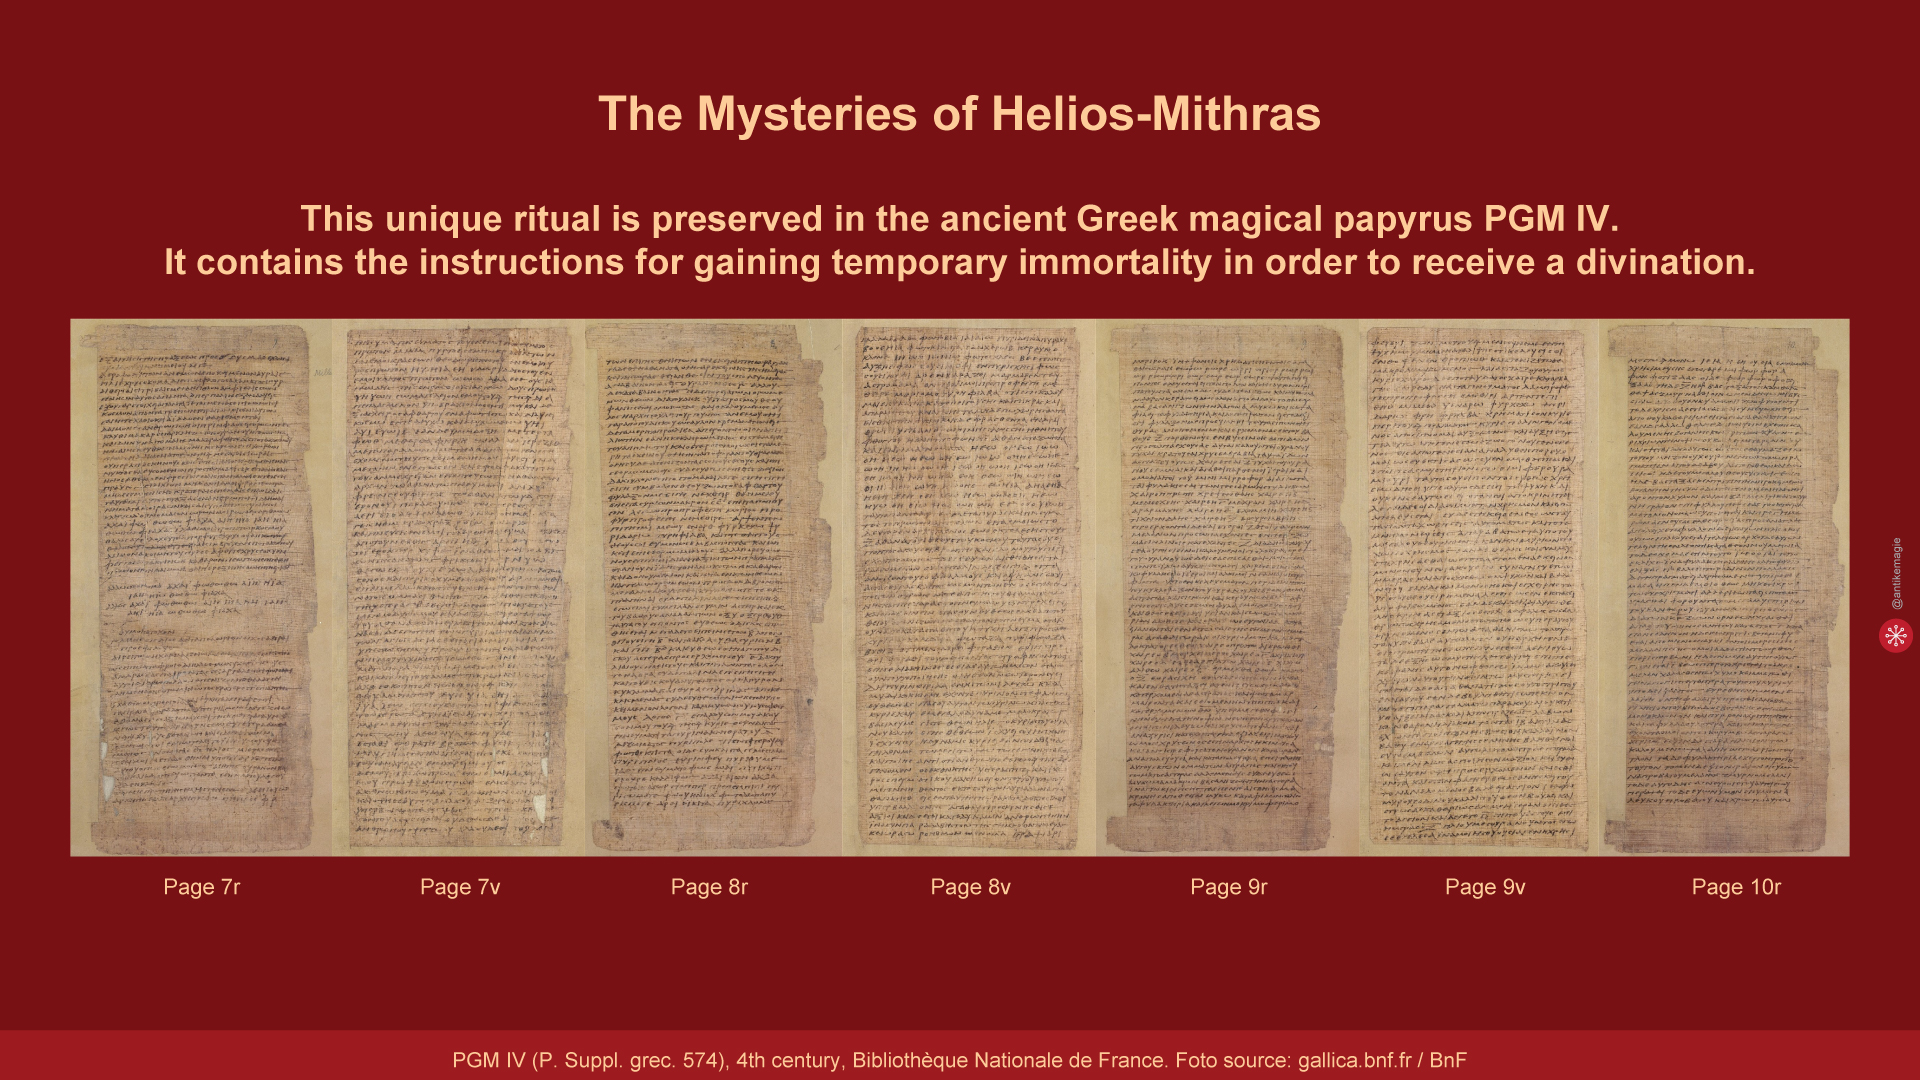 The complete text of "The Mysteries of Helios-Mithras" in the Greek magical book PGM IV - Bibliothèque Nationale de France, P.suppl.grec. 574